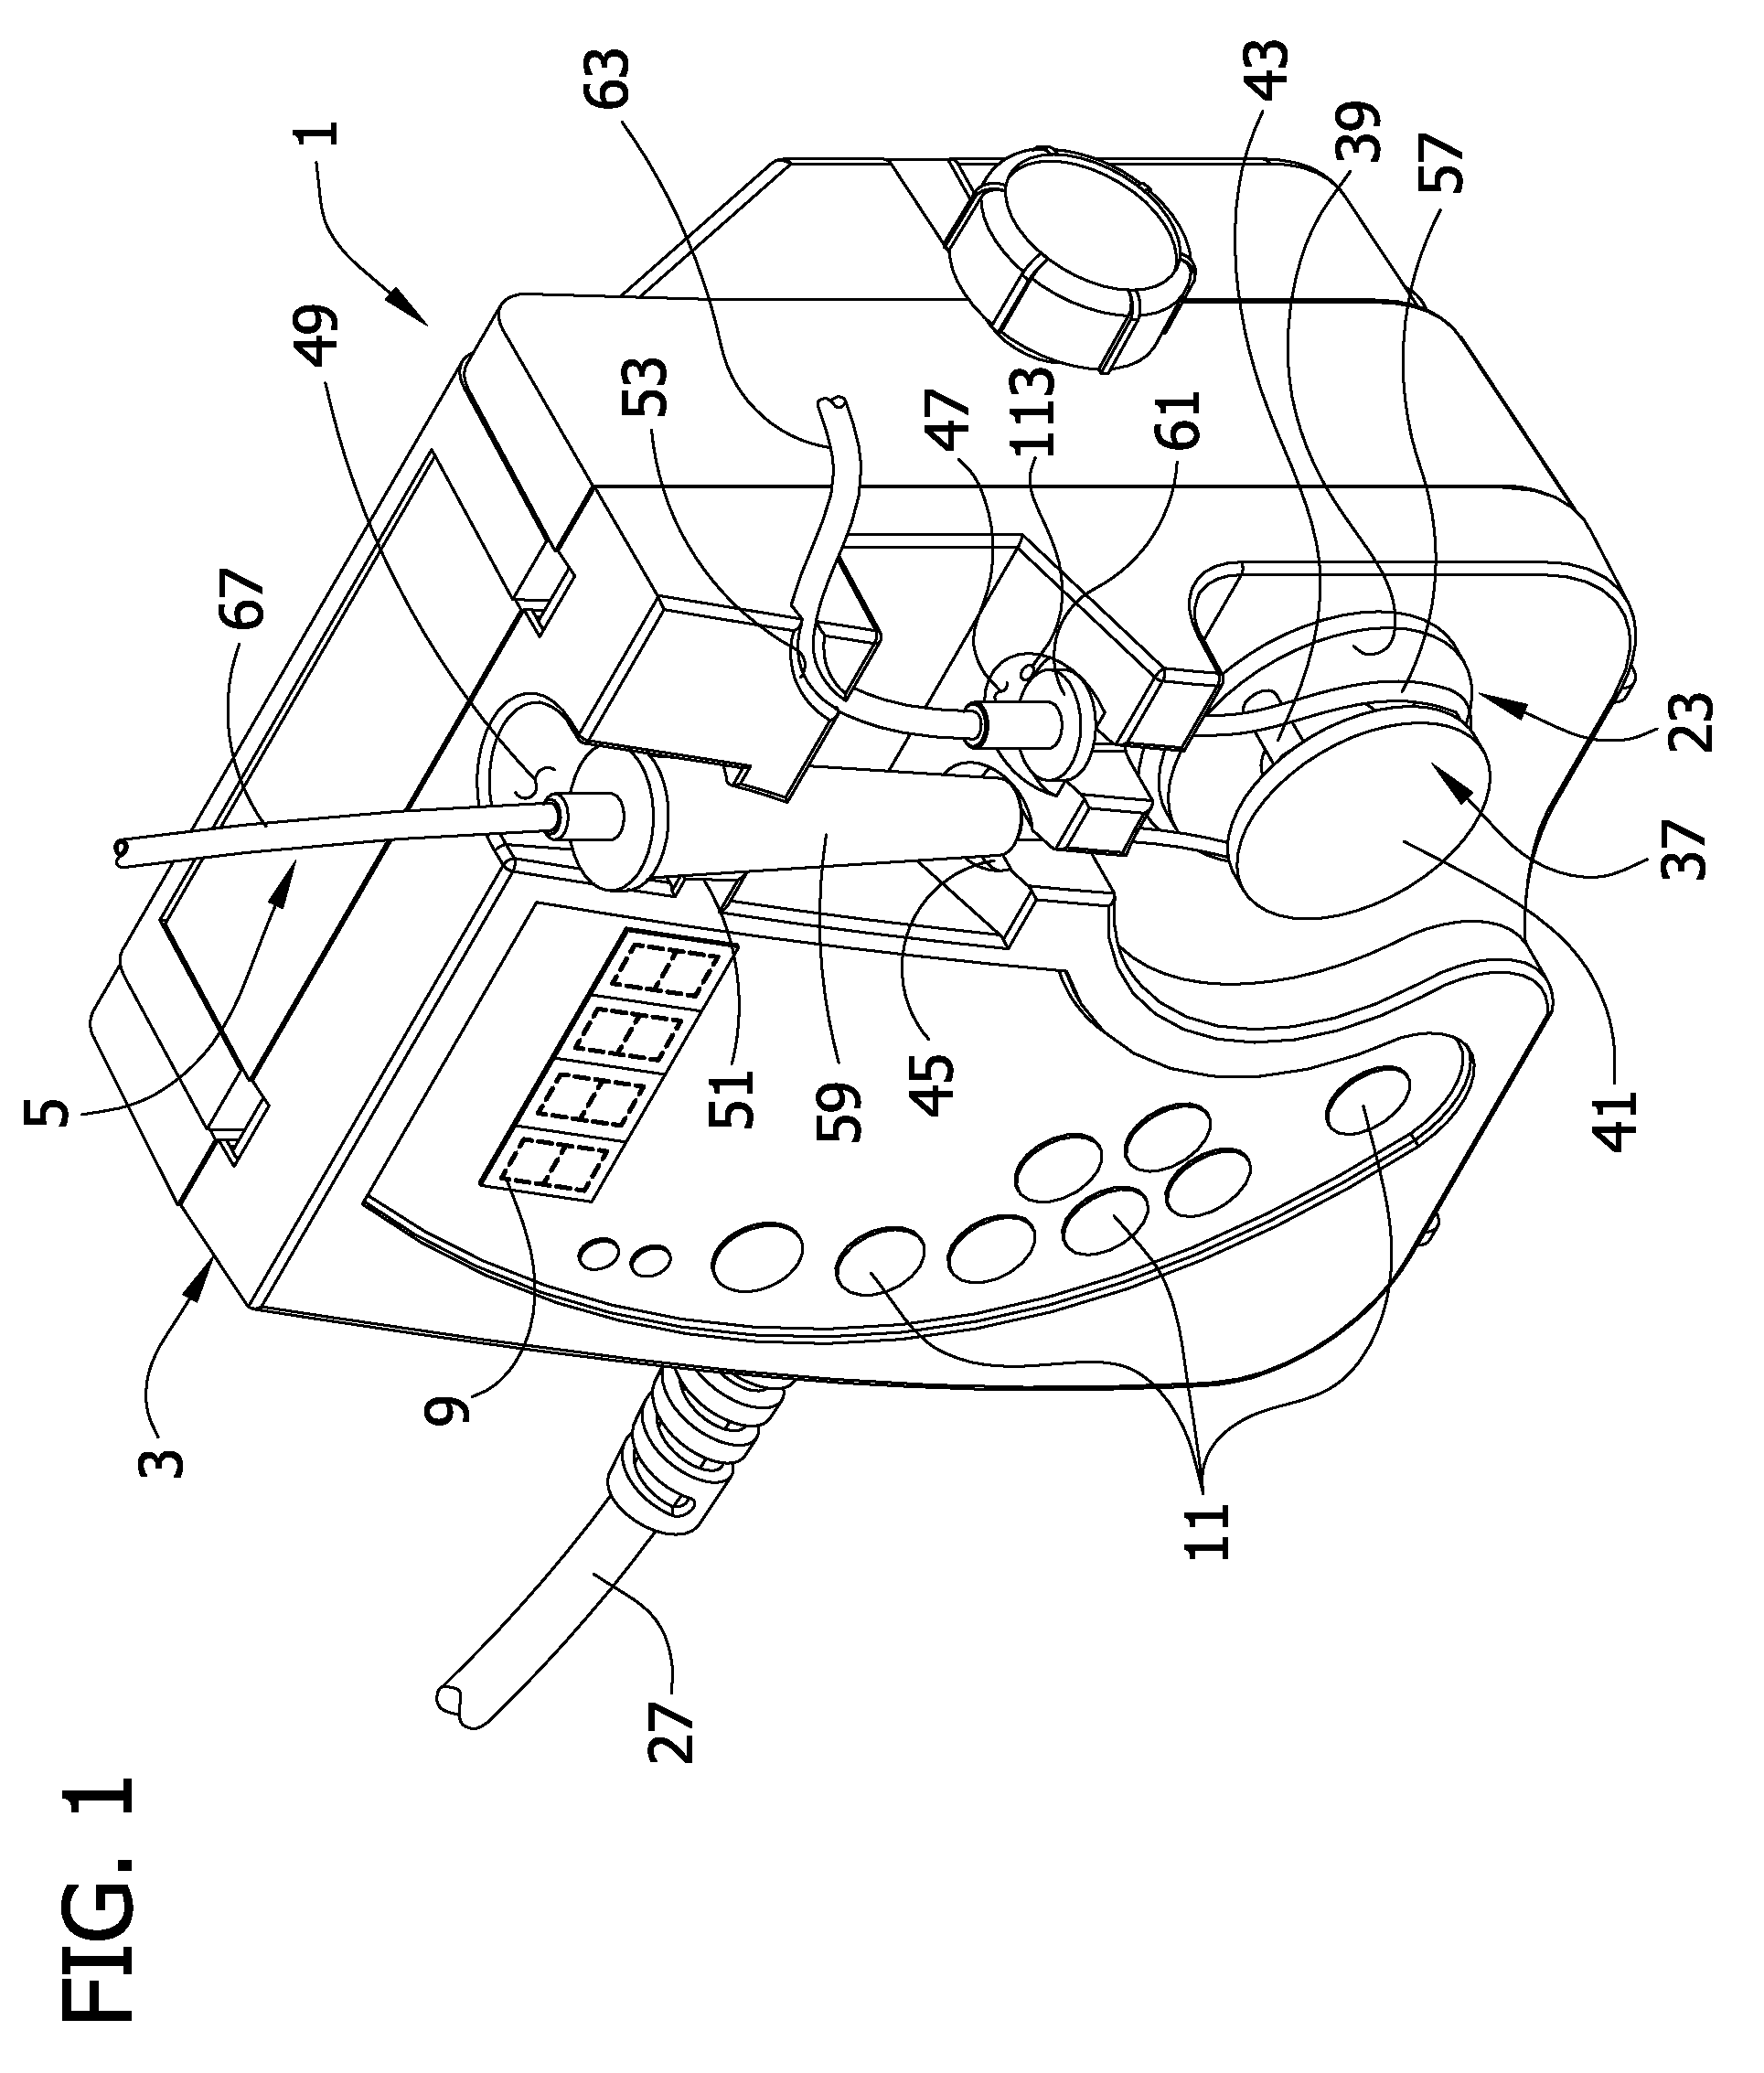 Pump set and pump with electromagnetic radiation operated interlock